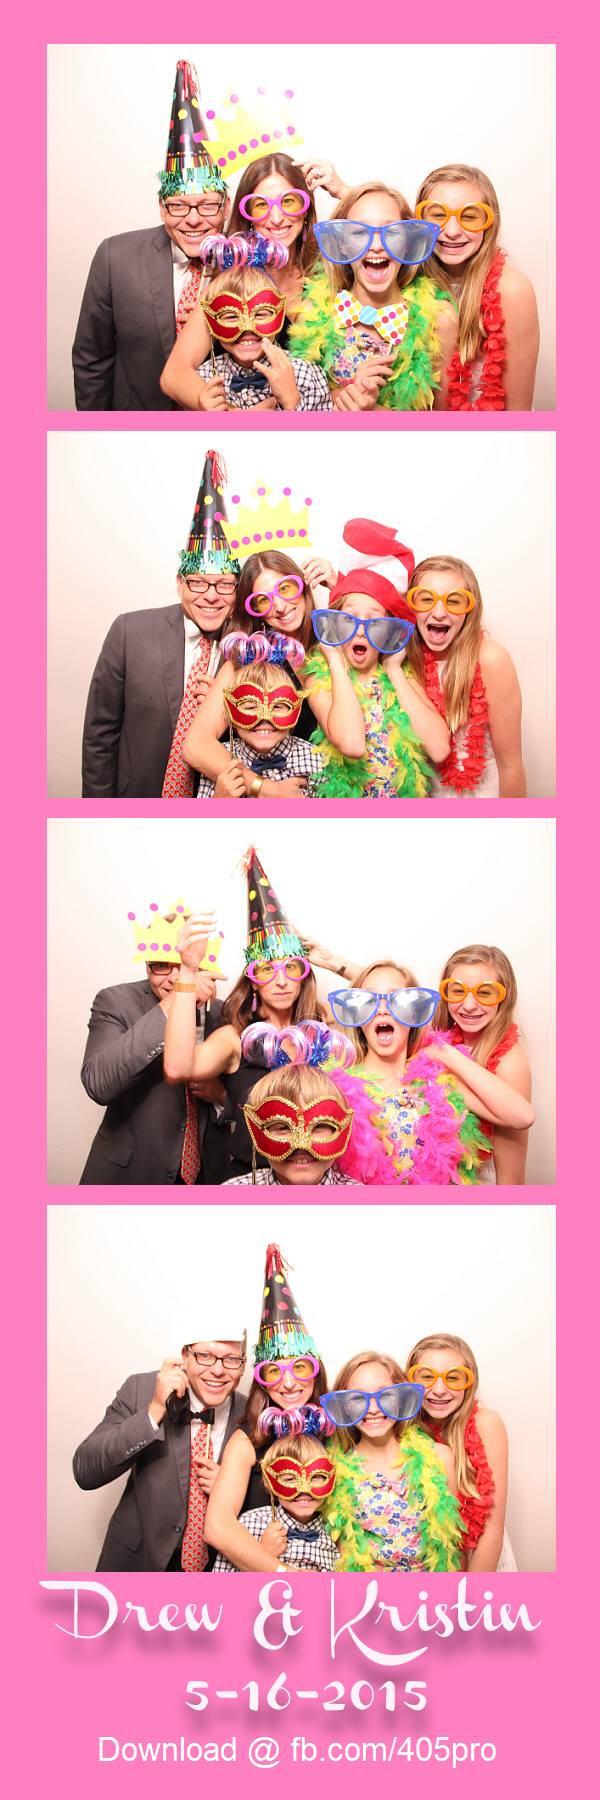 Oklahoma Moore Photo Booth Rentals The Manor At Coffee Creek